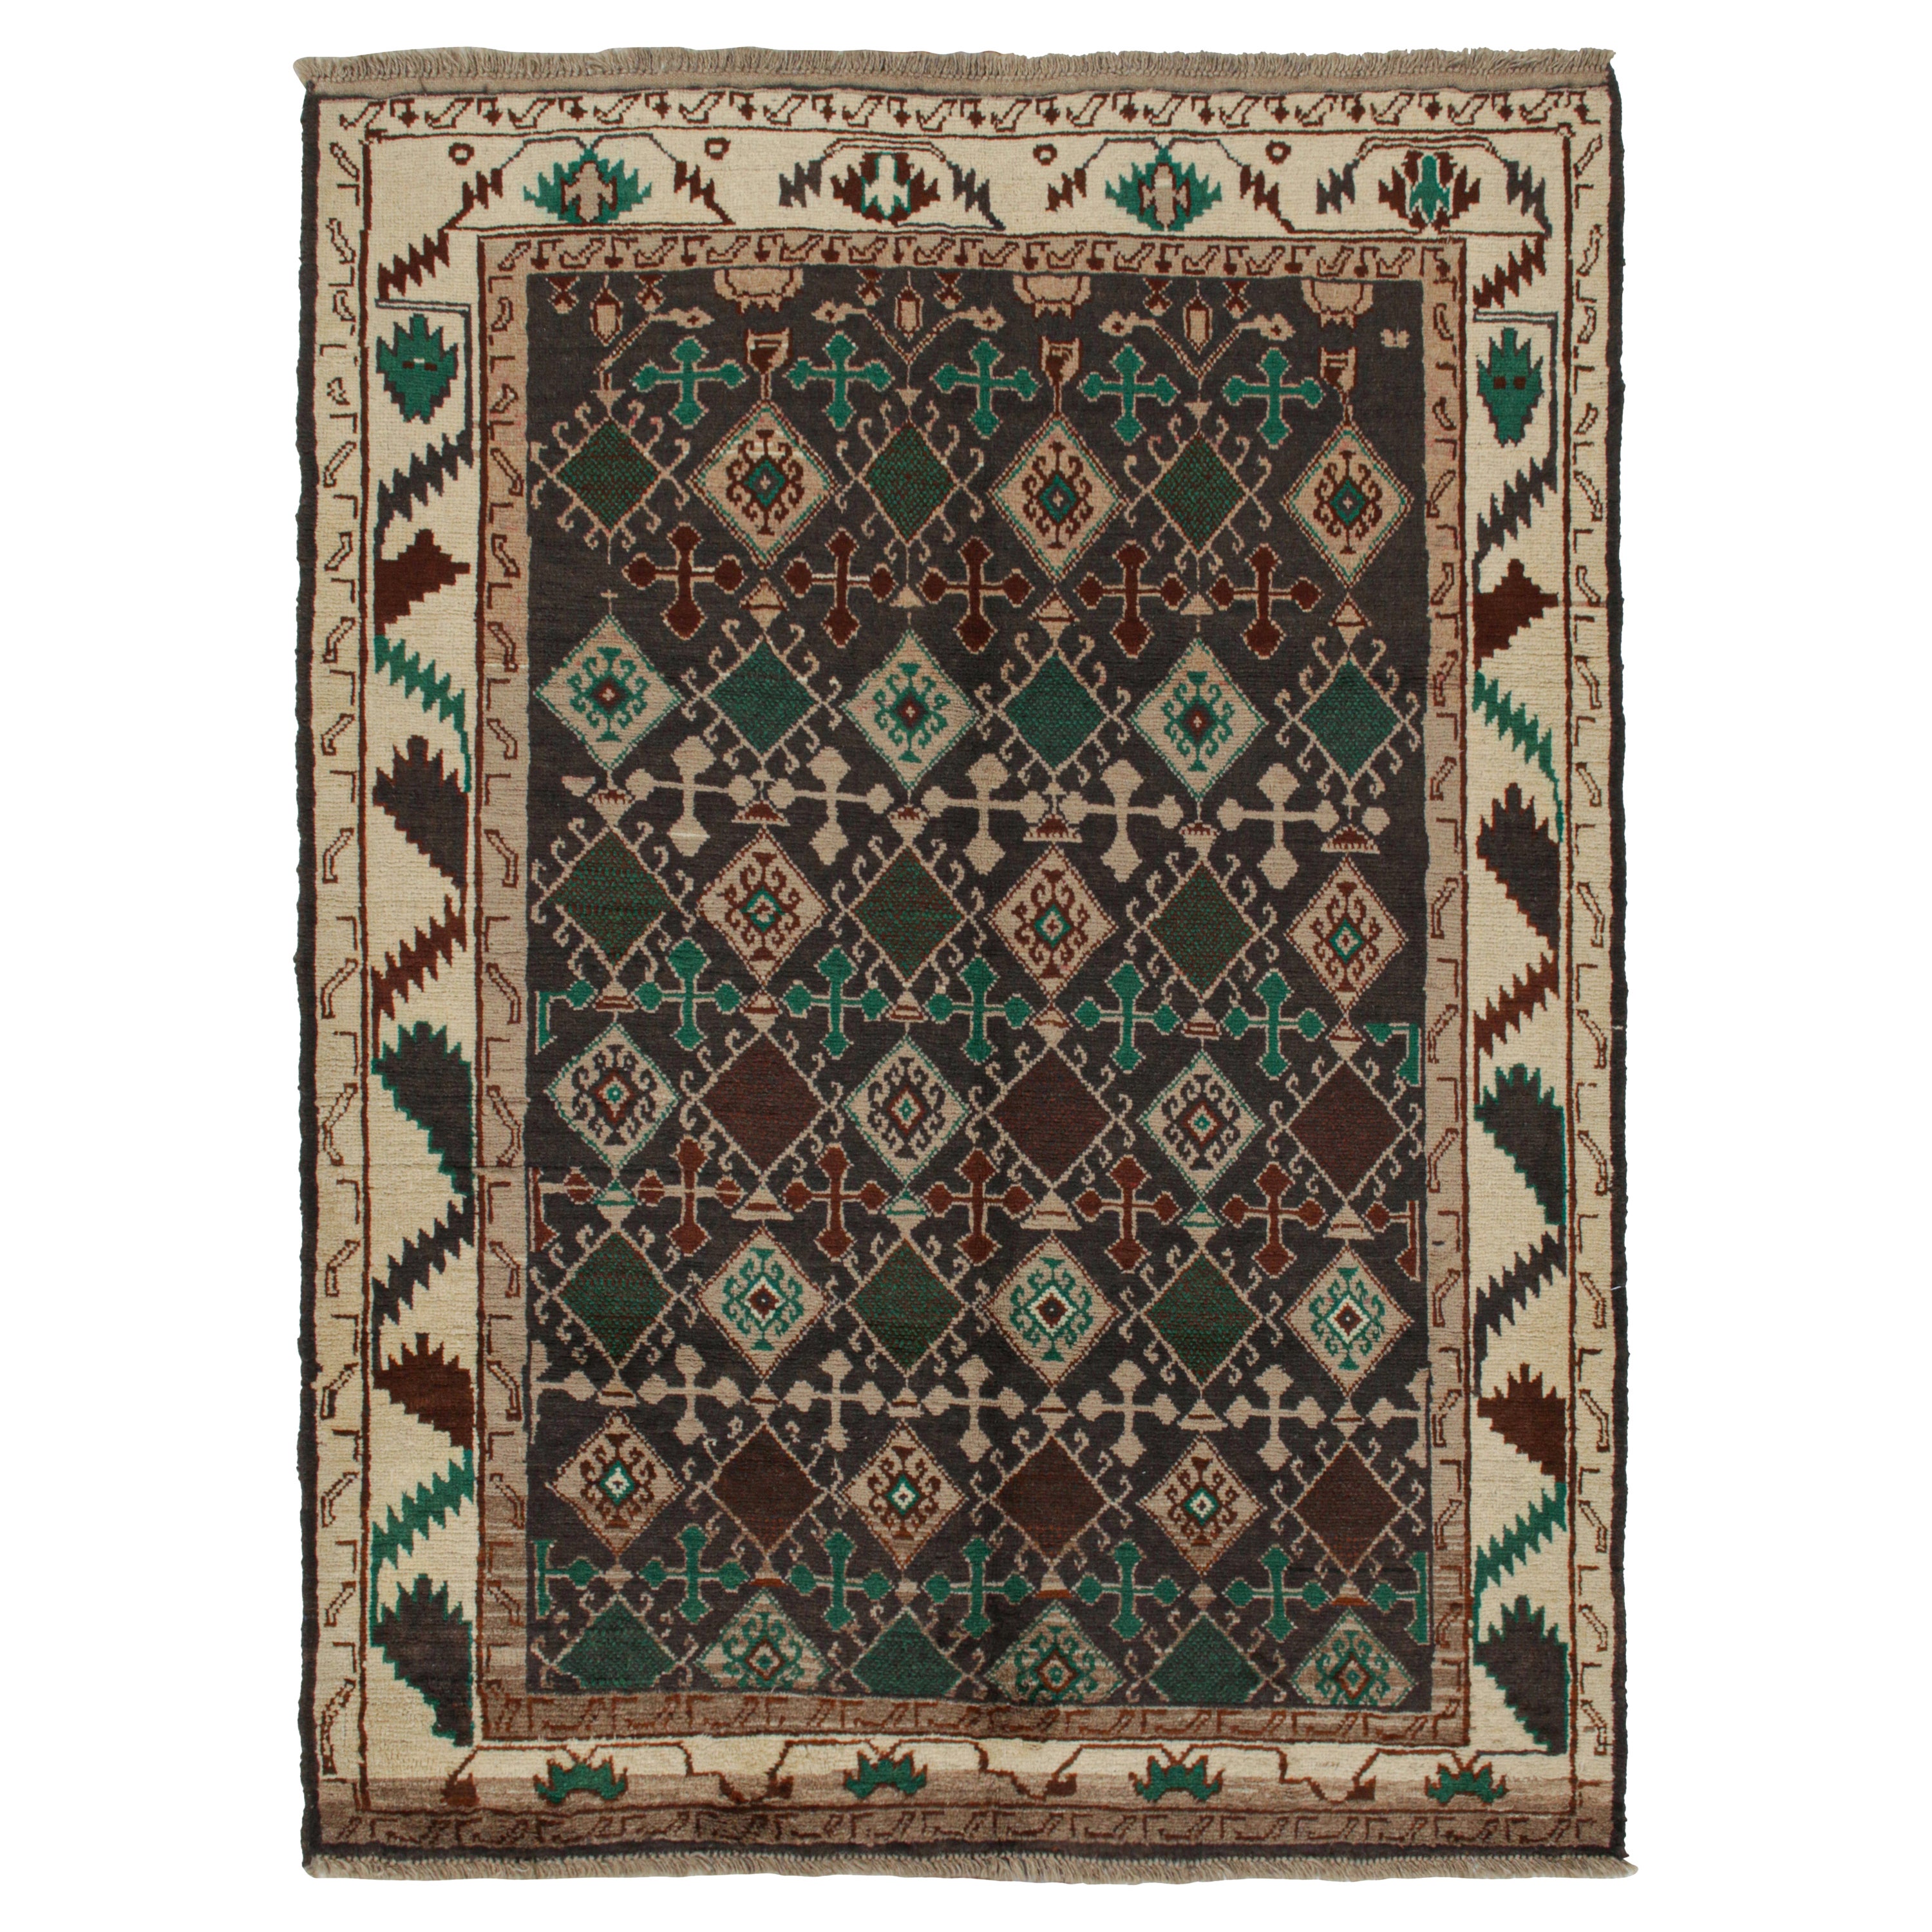 Rug & Kilim’s Oushak style rug in Brown with Green Geometric Patterns